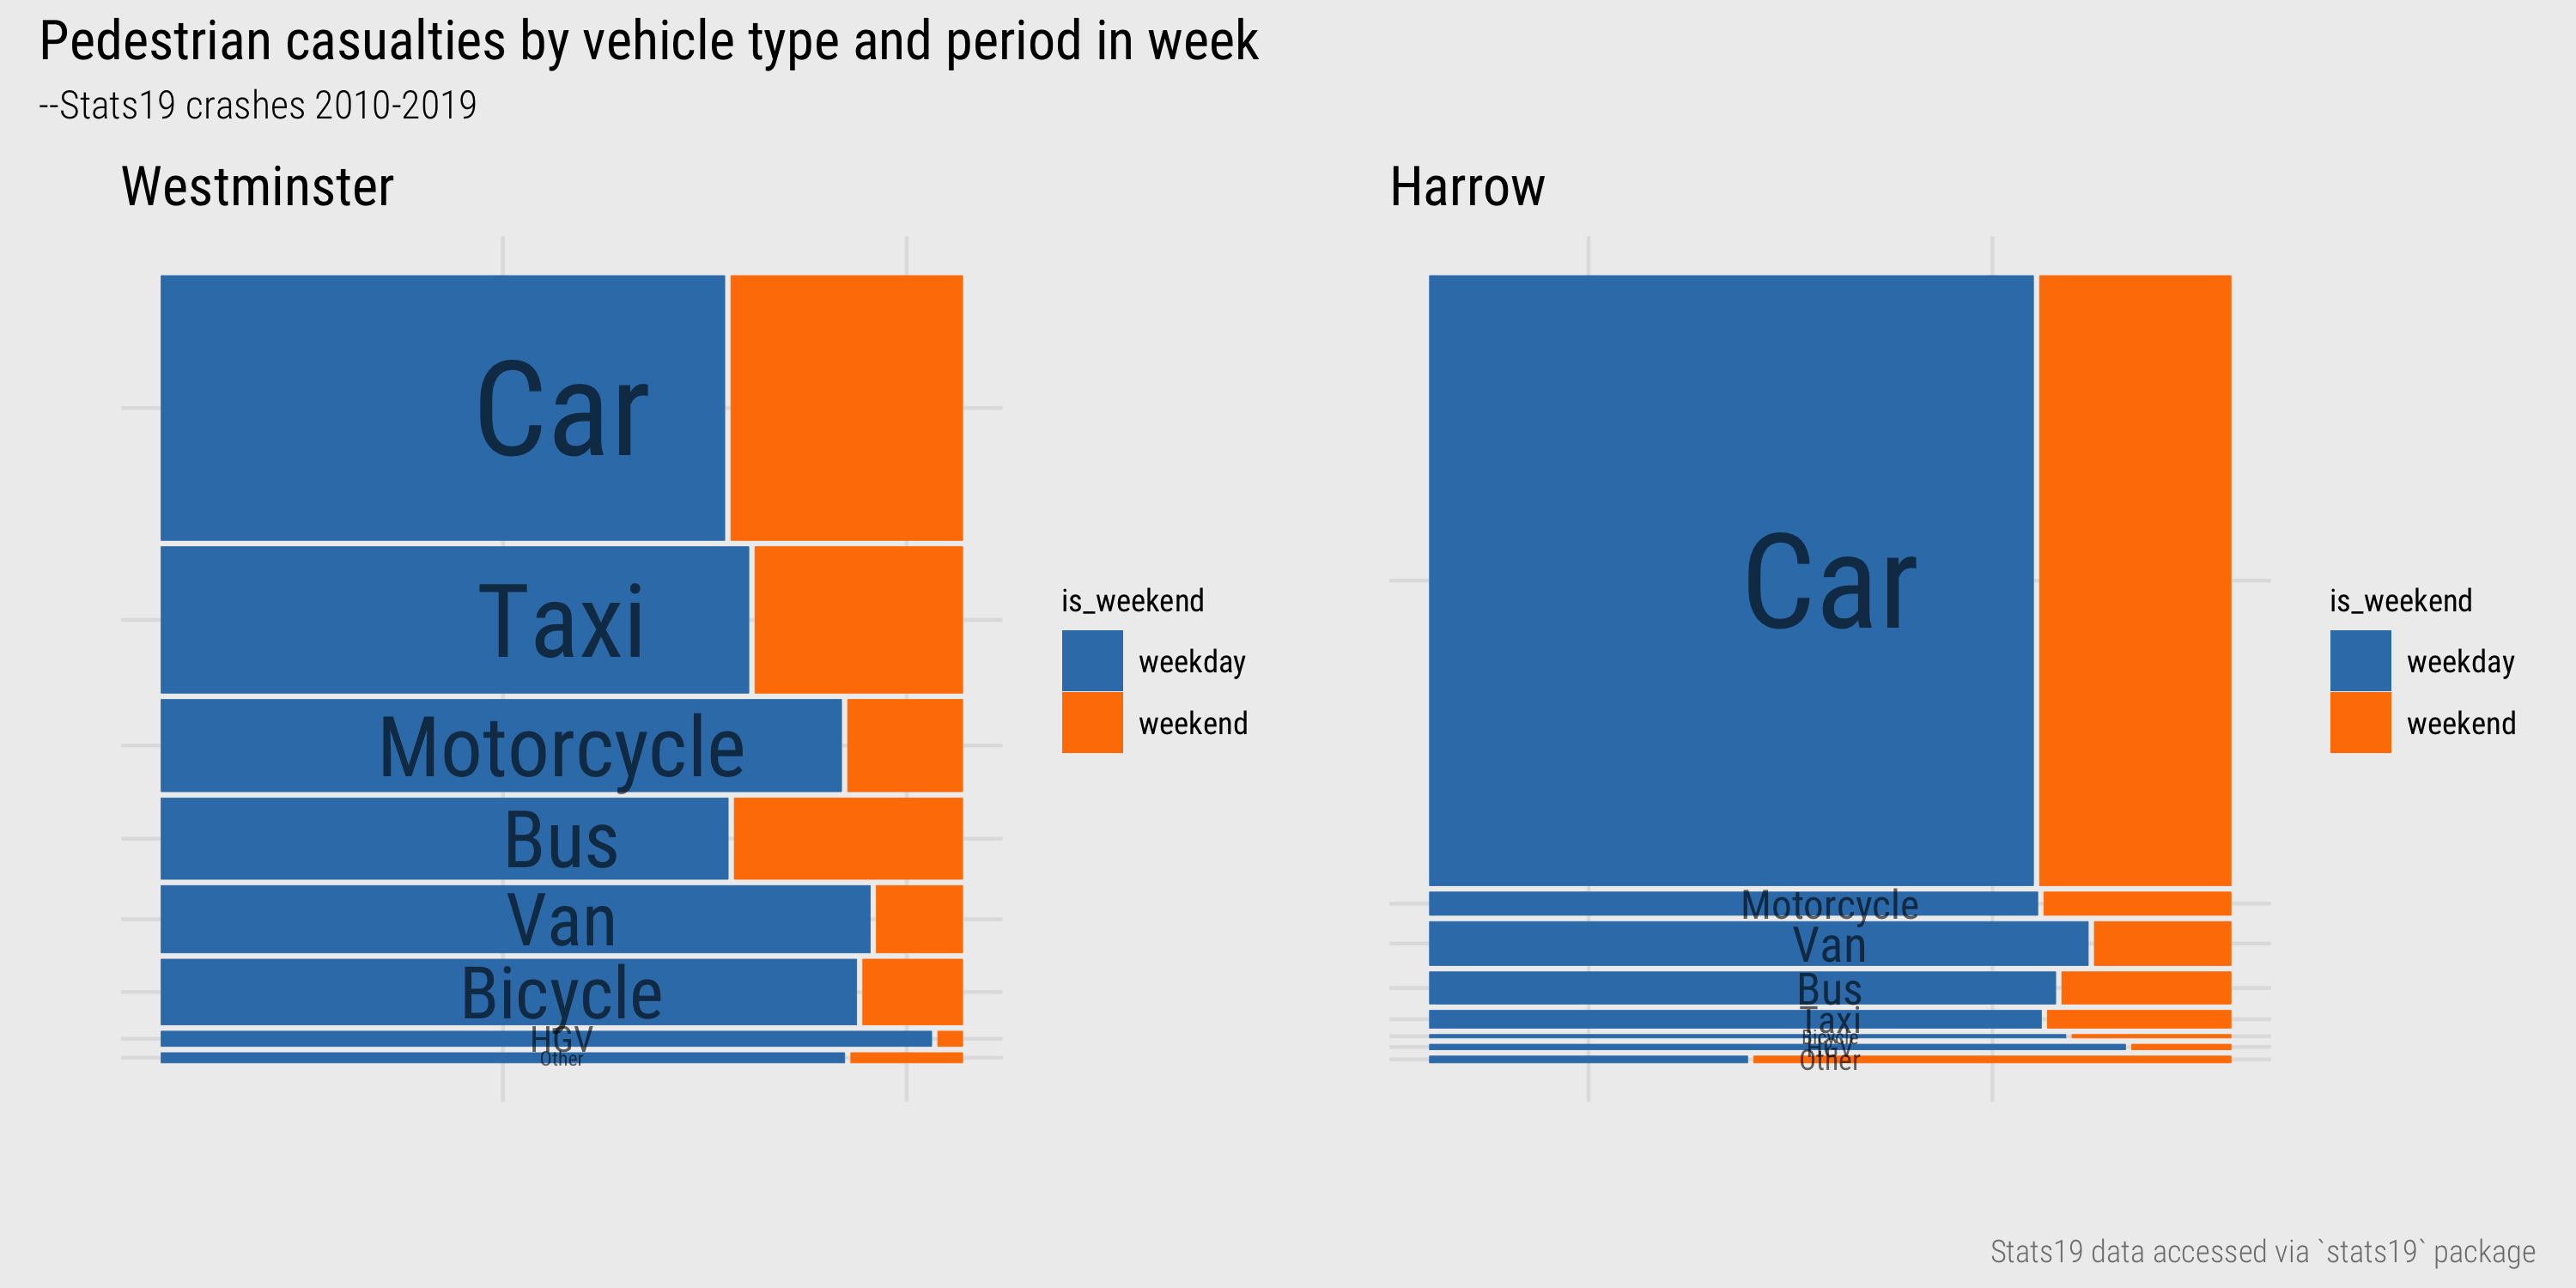 Mosaic plots of vehicle type and injury severity for Westminster and Harrow.